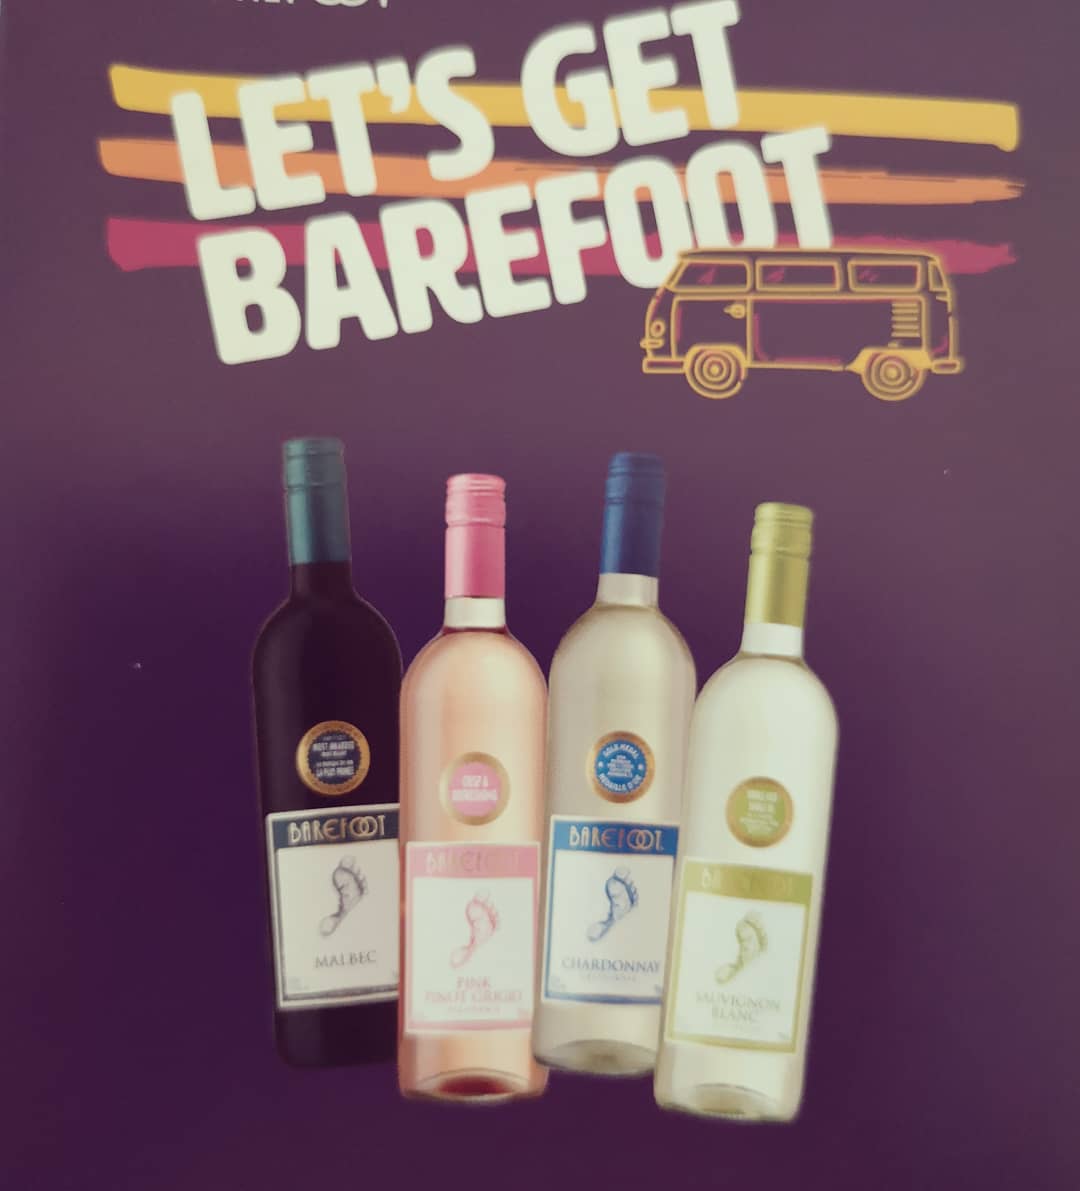 🙌 Congratulations to @barefootwineuk for reaching the no.12 slot in Nielsen Britain’s biggest alcohol brands. Great working with you 🙌

#barefootwine #nielsen #clientlove